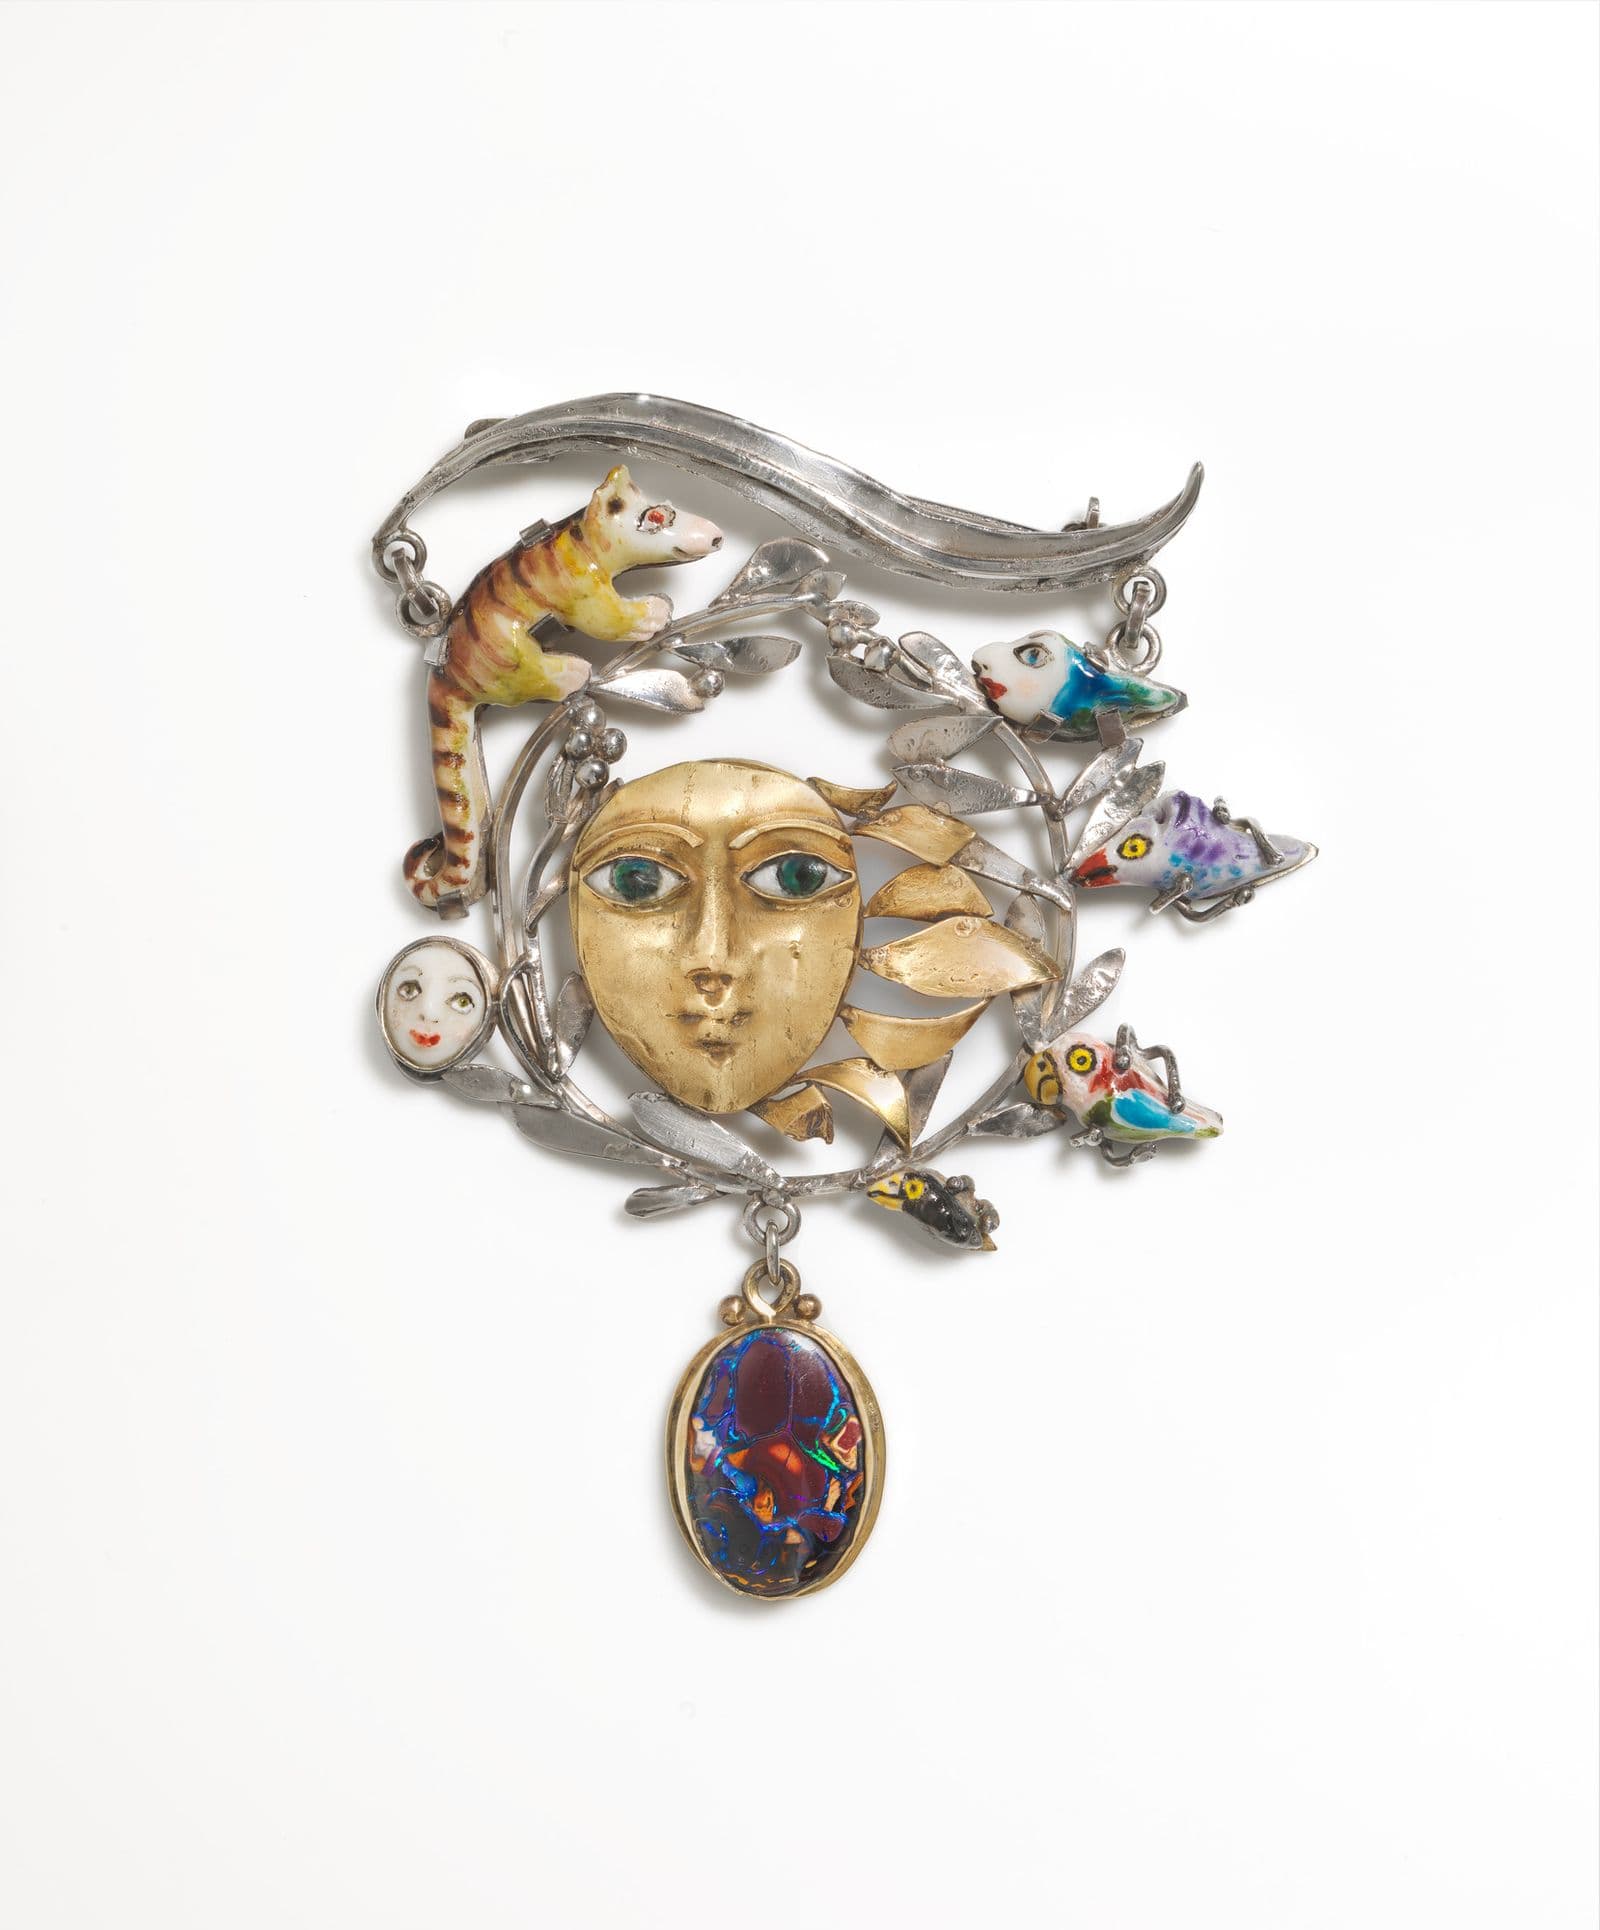 Intricate brooche with animal, leaves, and face forms